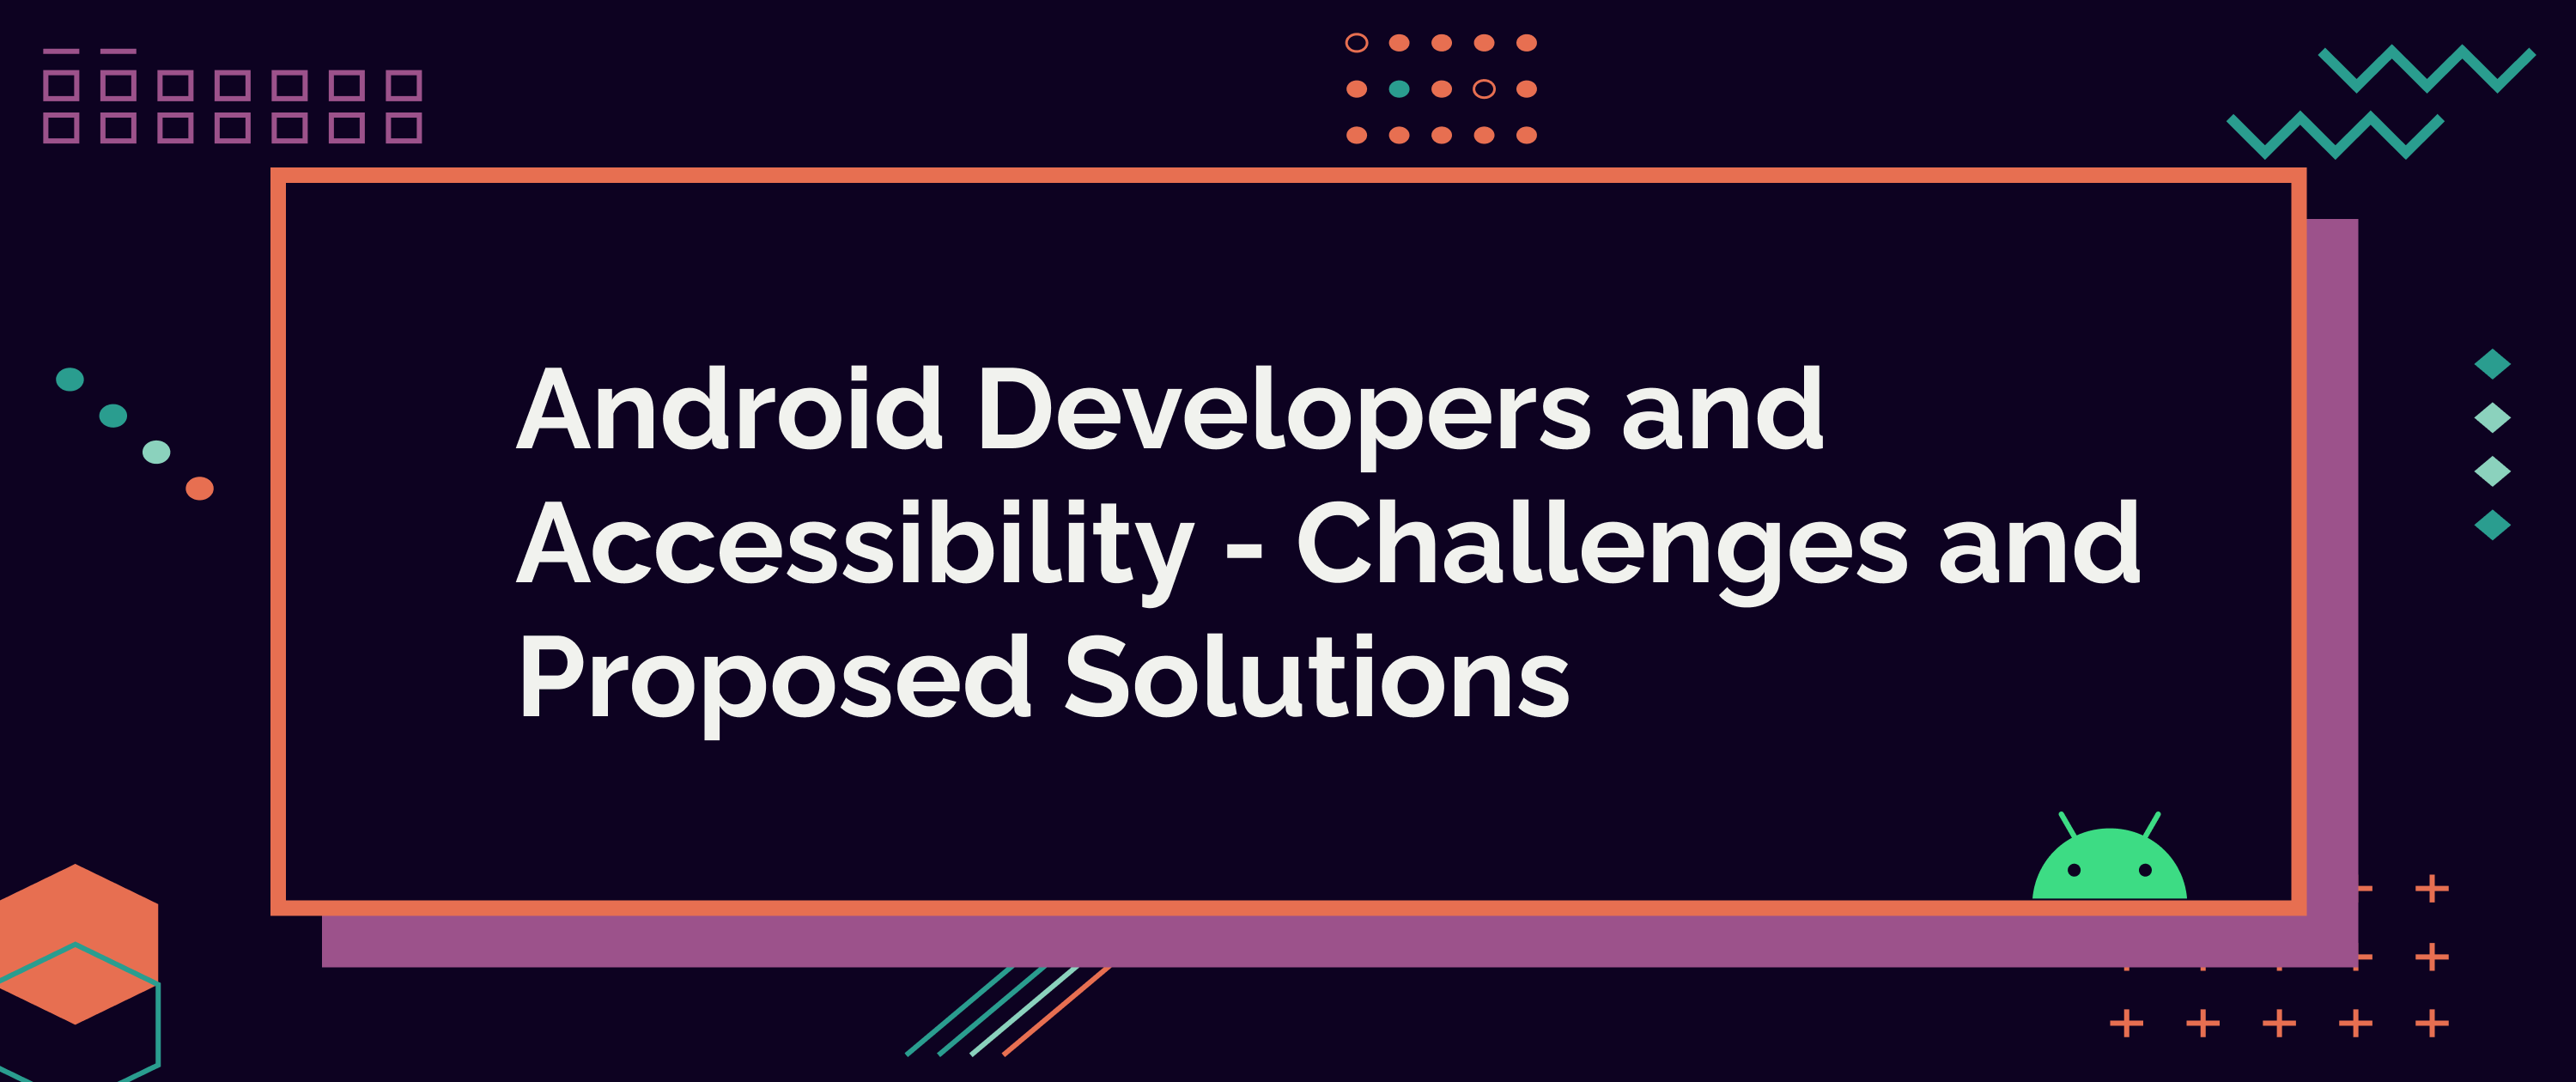 Android Developers and Accessibility - Challenges and Proposed Solutions